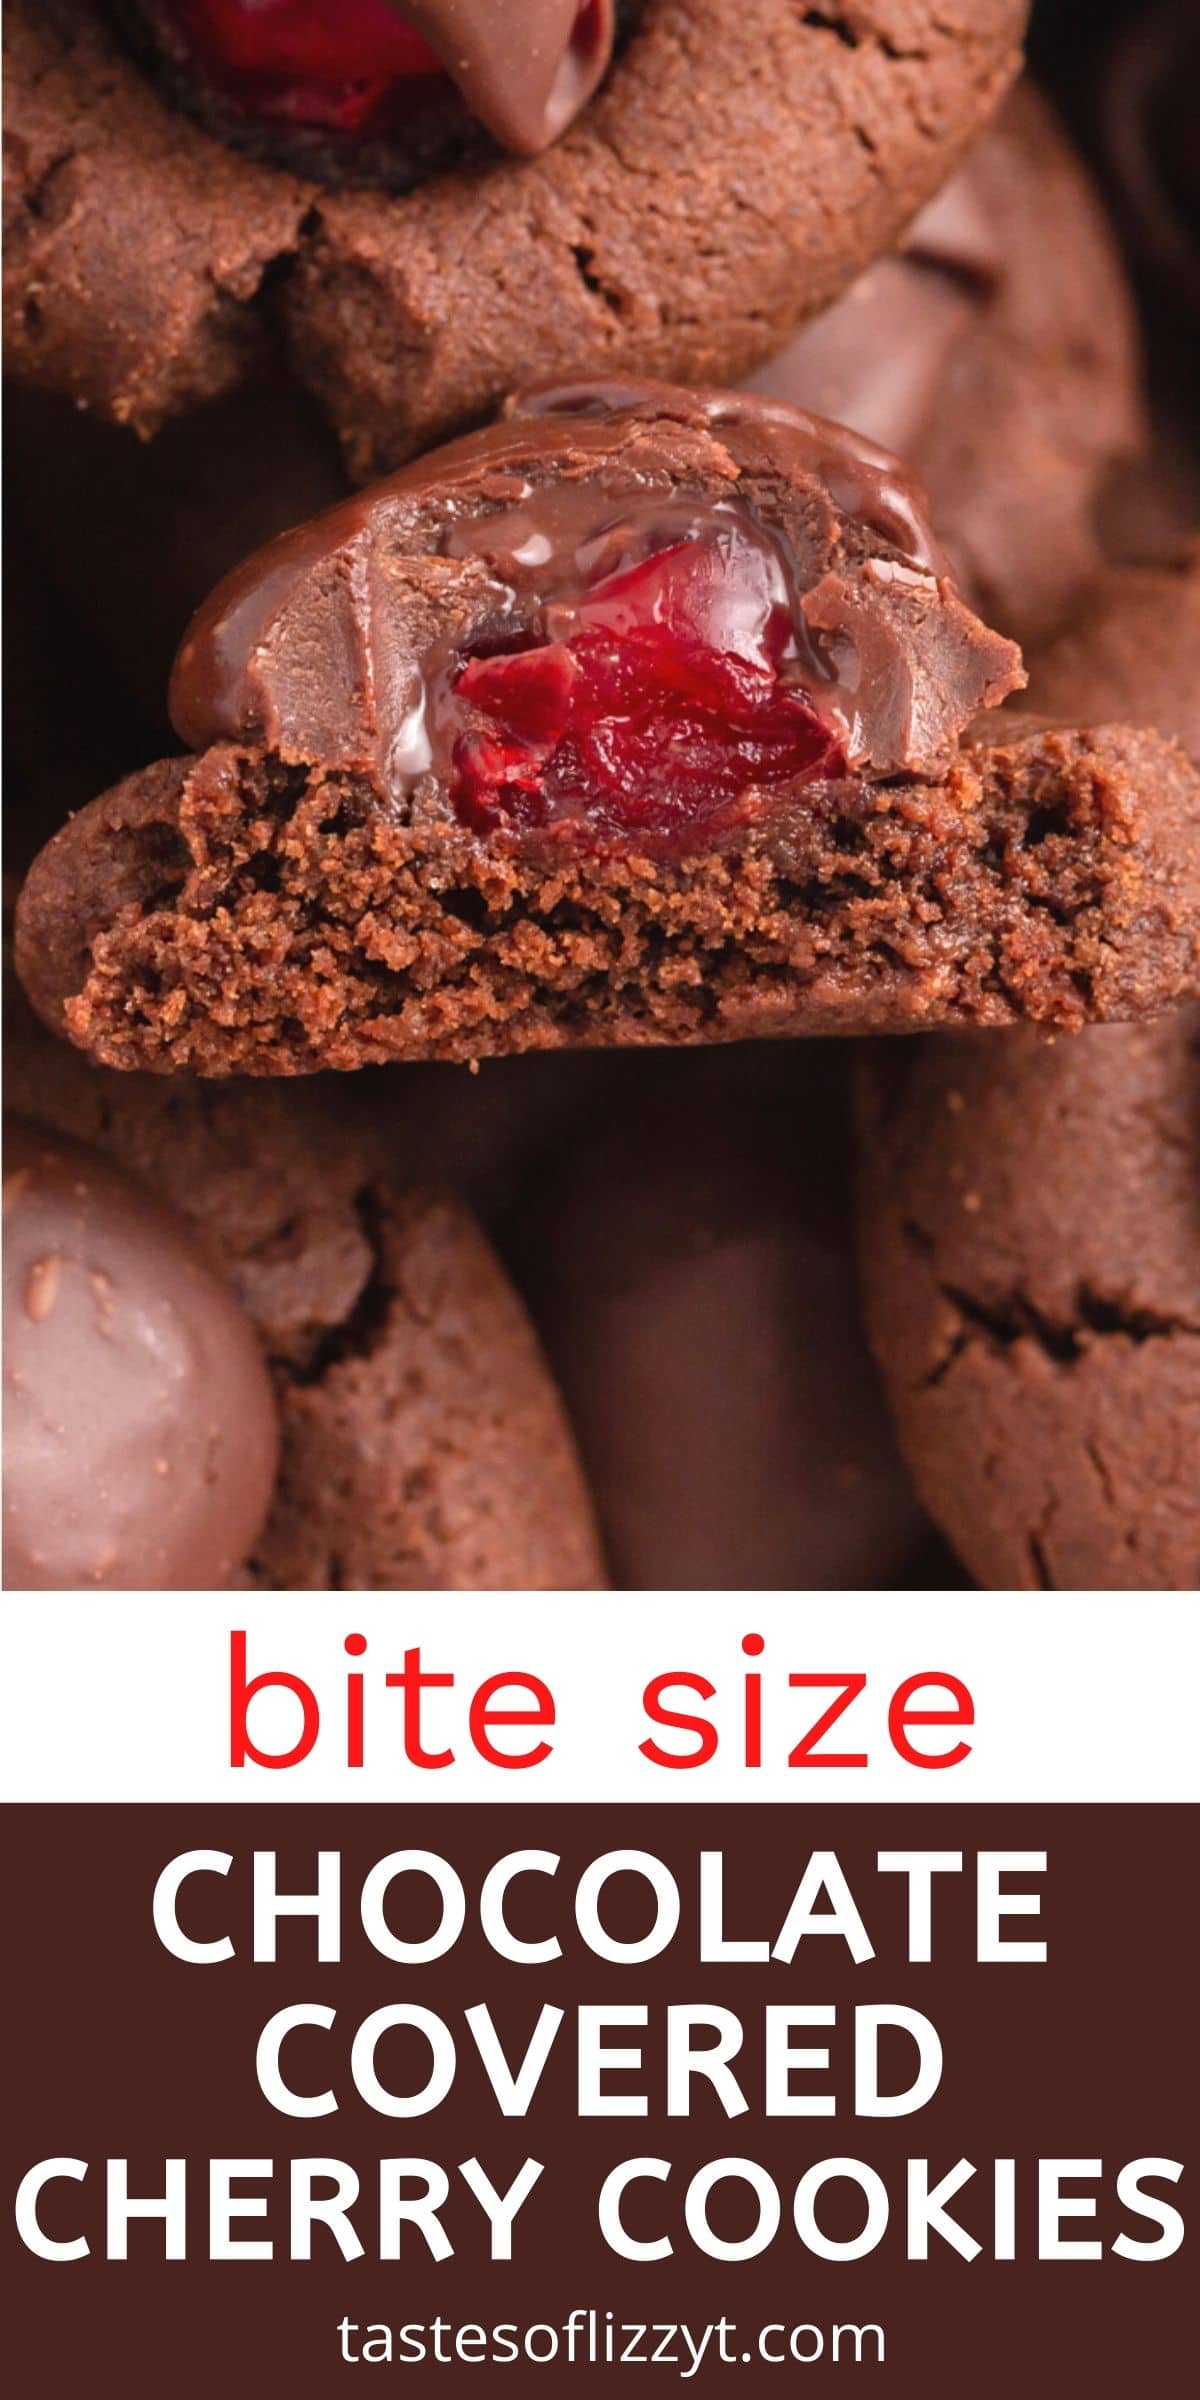 Bite into chocolate covered cherry cookies and find a cherry surprise inside. From-scratch chocolate cookies with a dollop of chocolate. via @tastesoflizzyt